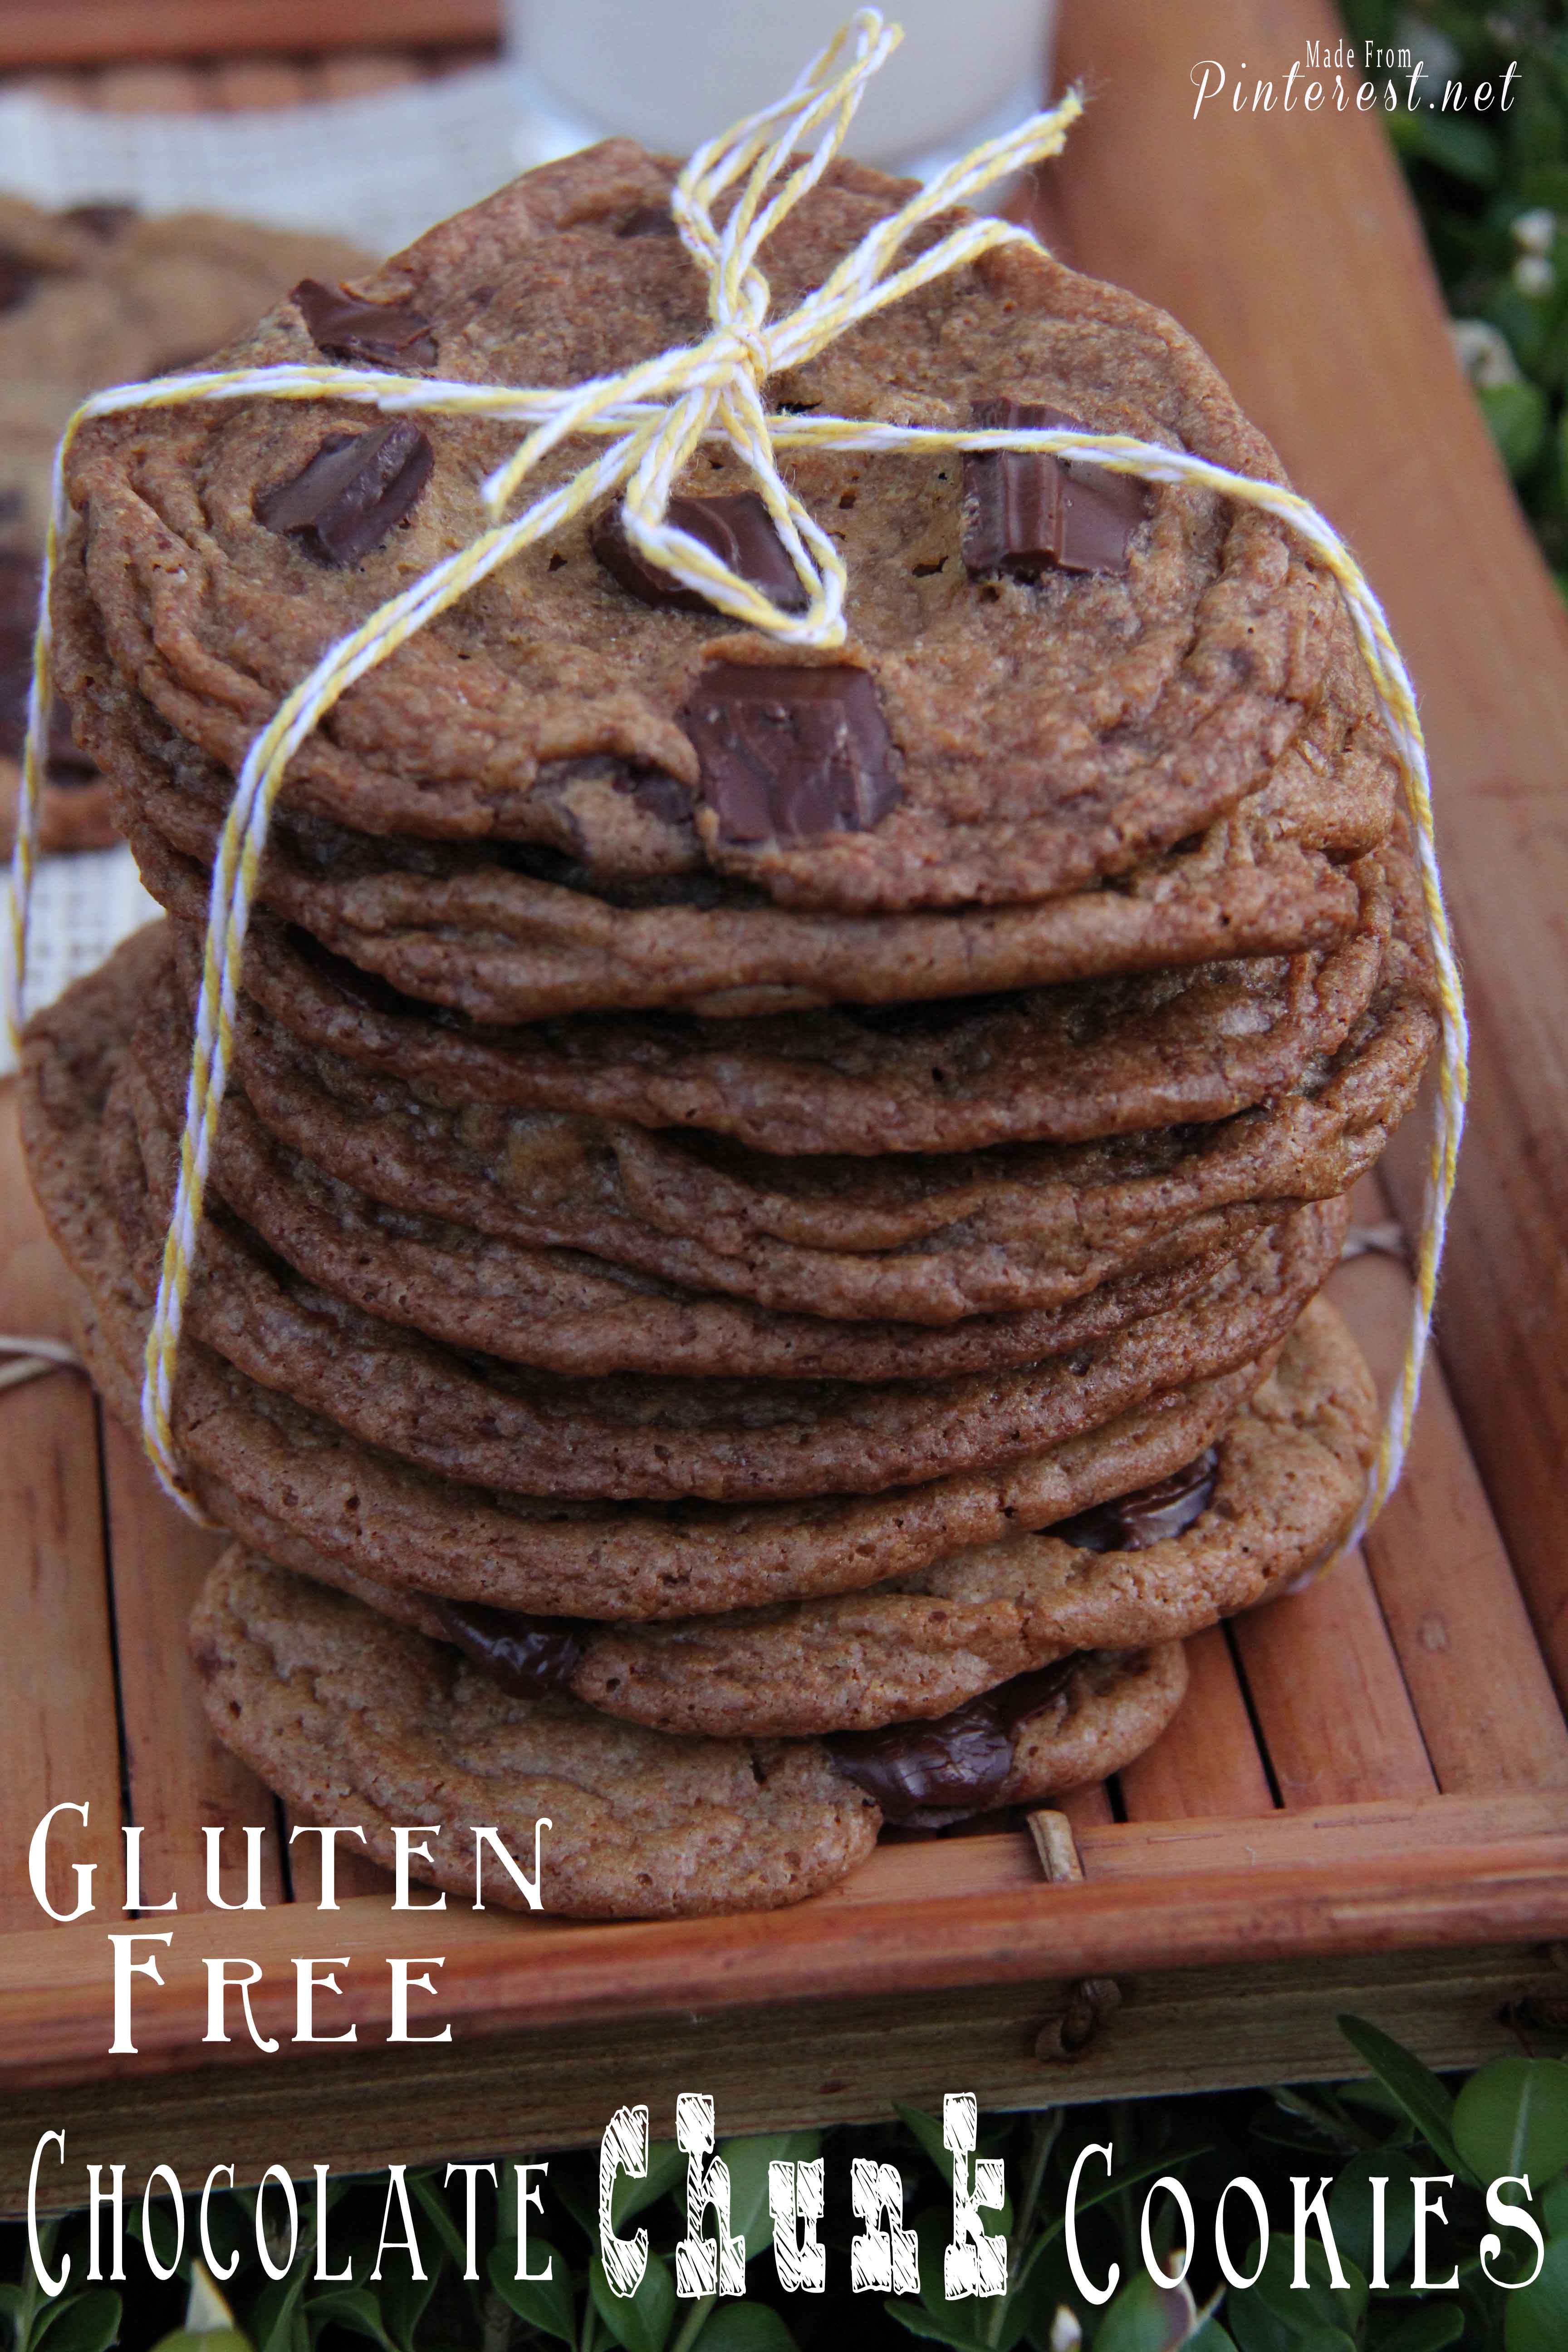 #Gluten Free #Chocolate Chunk #Cookies - These are the best, most amazing gluten free cookies I have ever eaten! Pin this now because gluten free or not you will want to make and eat these cookies!